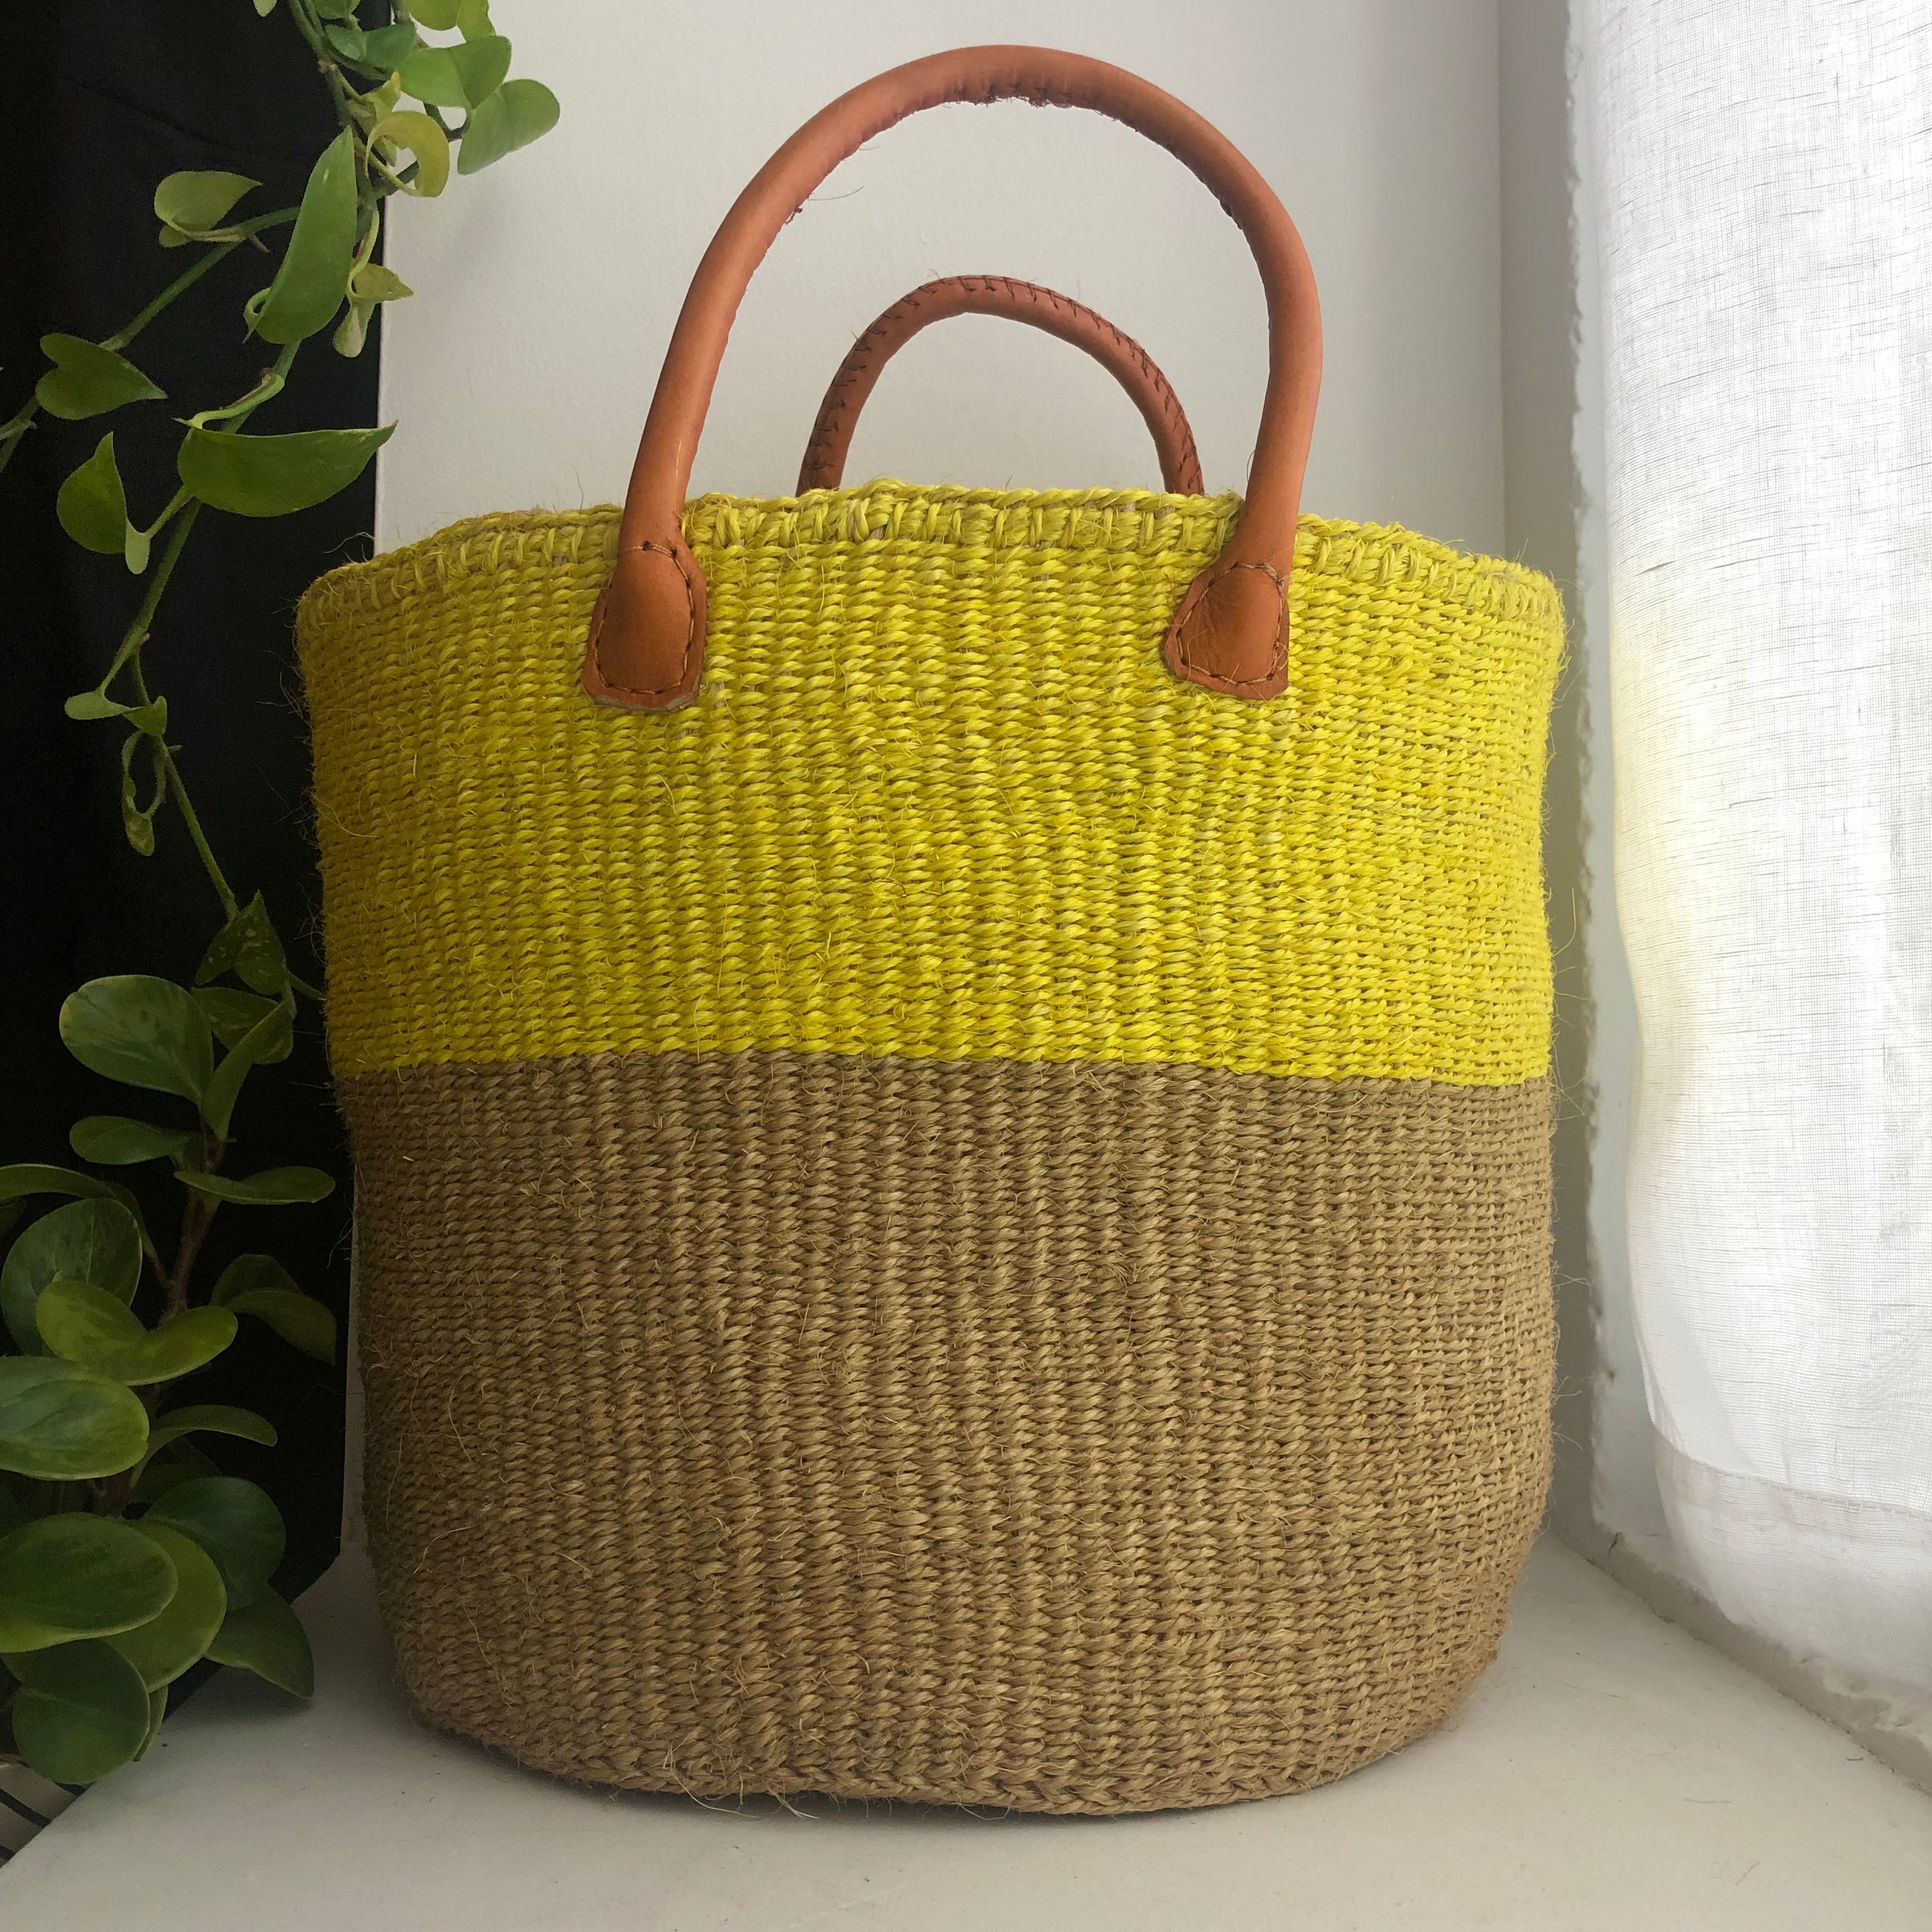 Yellow basket with leather handles.